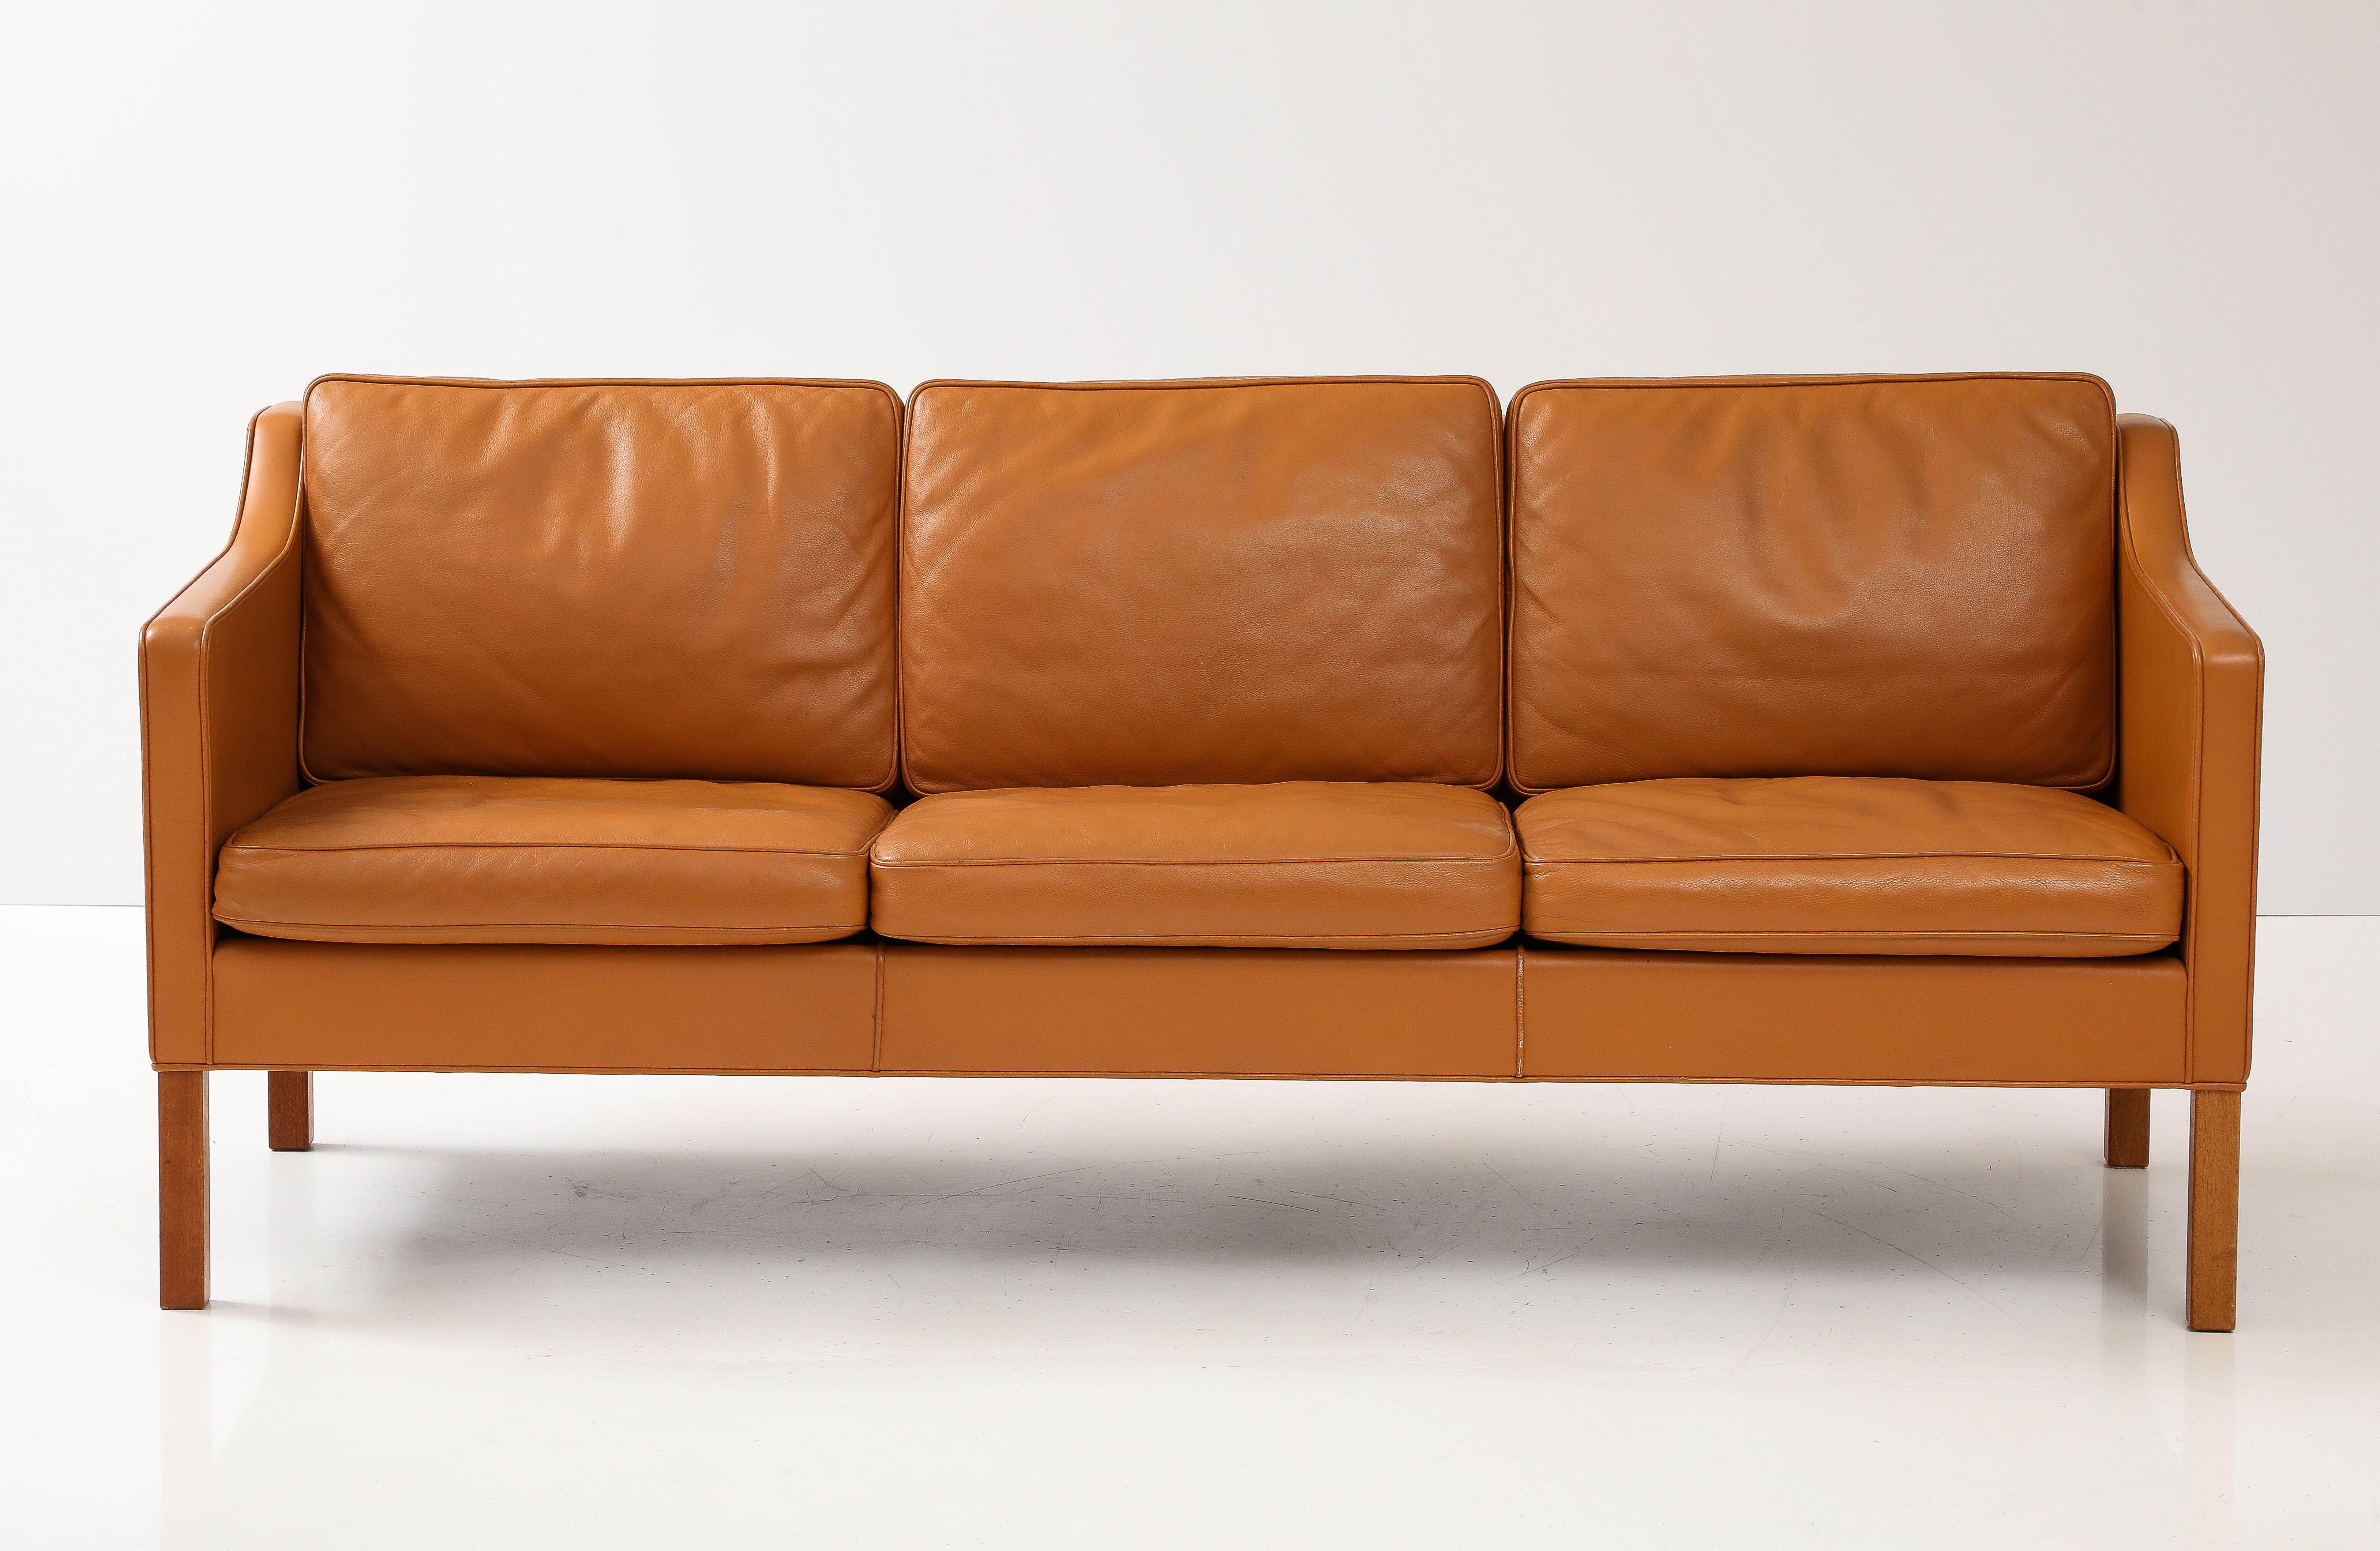 Full Thick Grain Bison Leather.  Desirable Scandinavian cognac color.  Three Seat Sofa. Labelled underneath.  